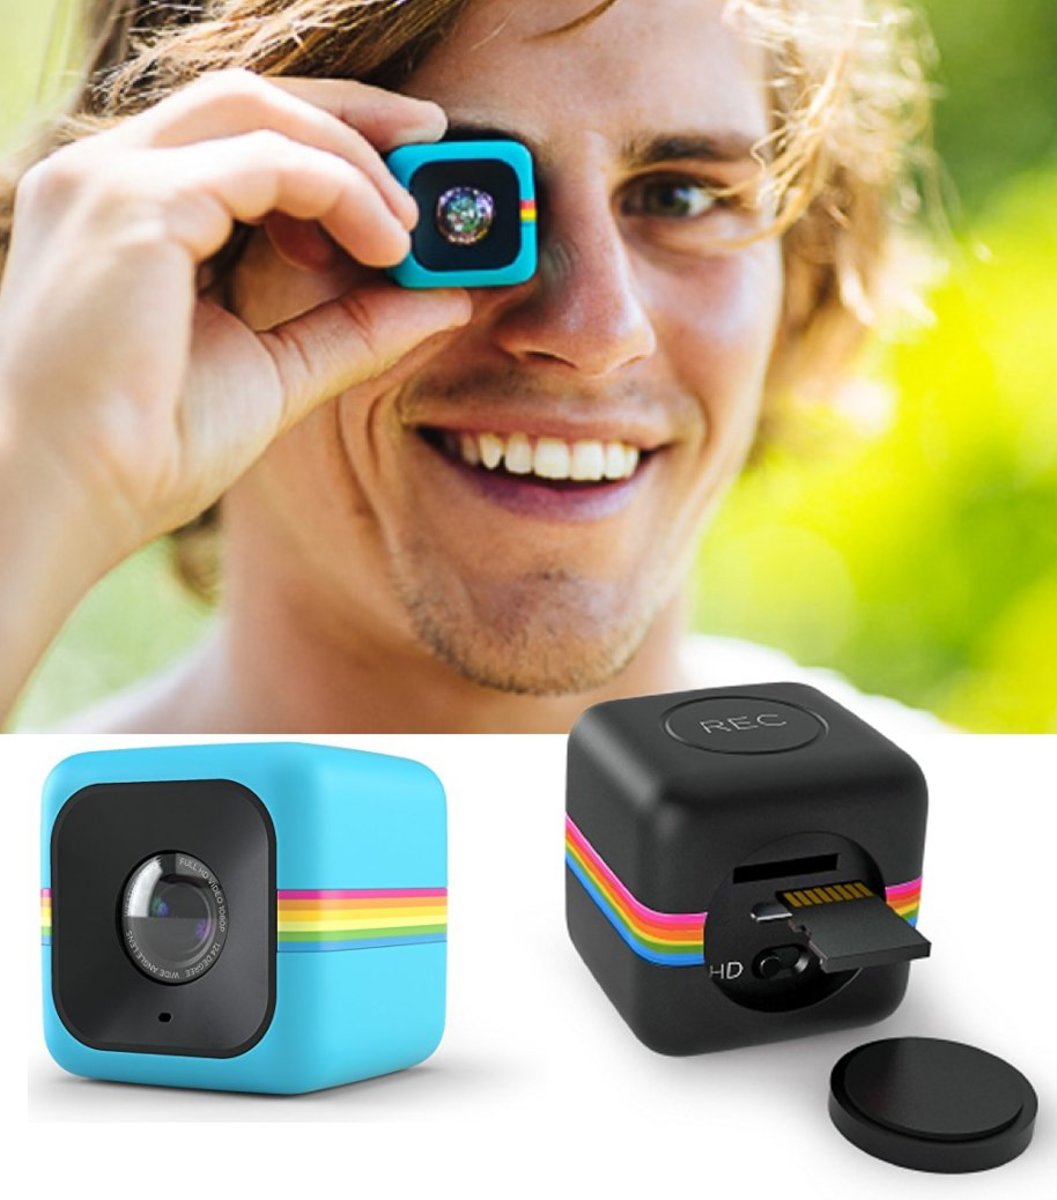 Polaroid Cube Plus is the only action camera with image stabilization. 